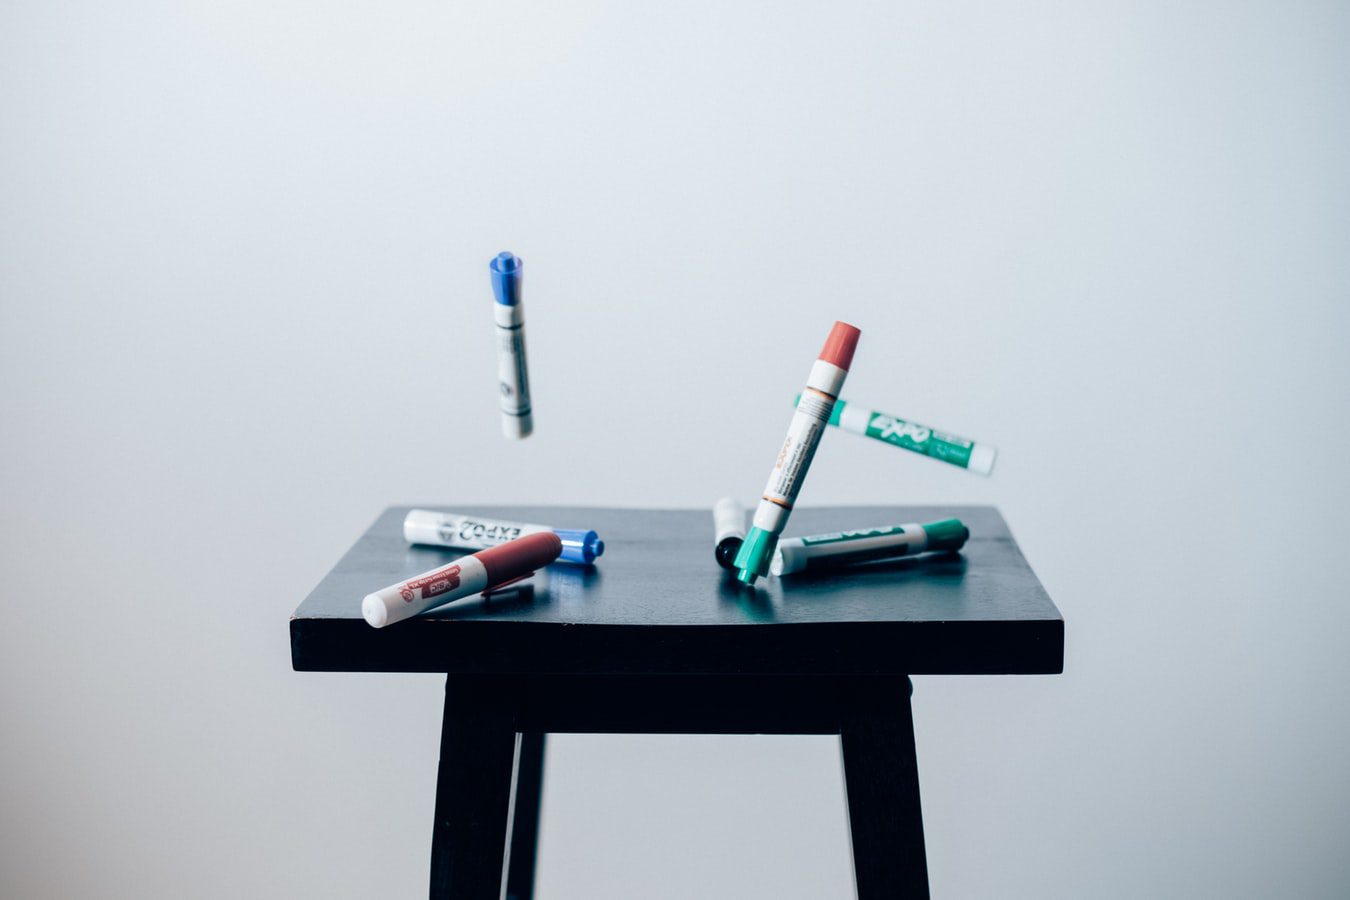 Pens on a table